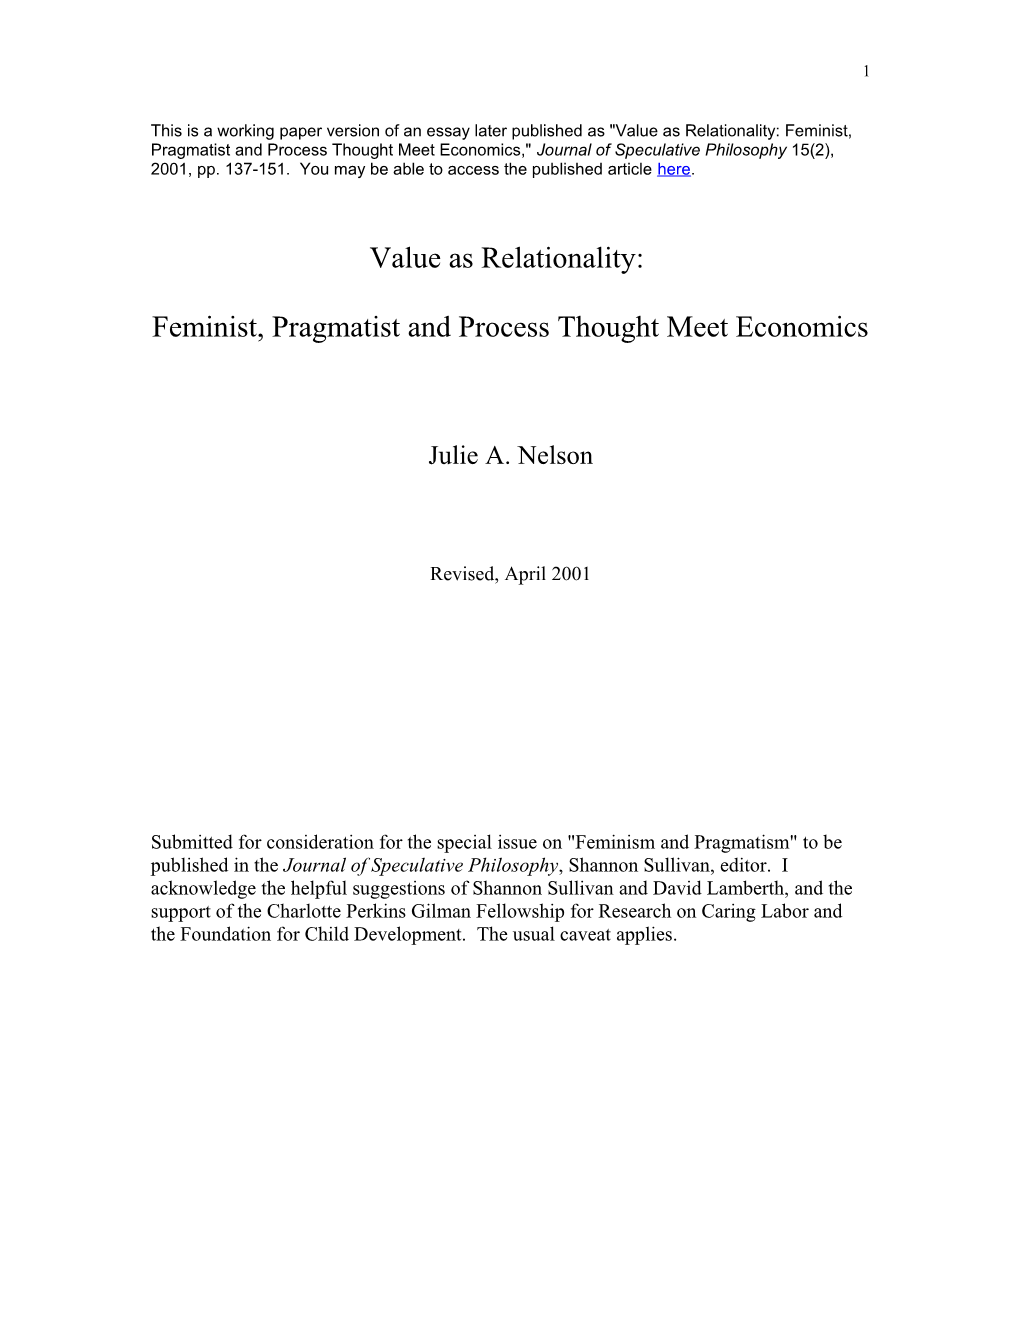 Value As Relationality in Feminist and Pragmatist Thought